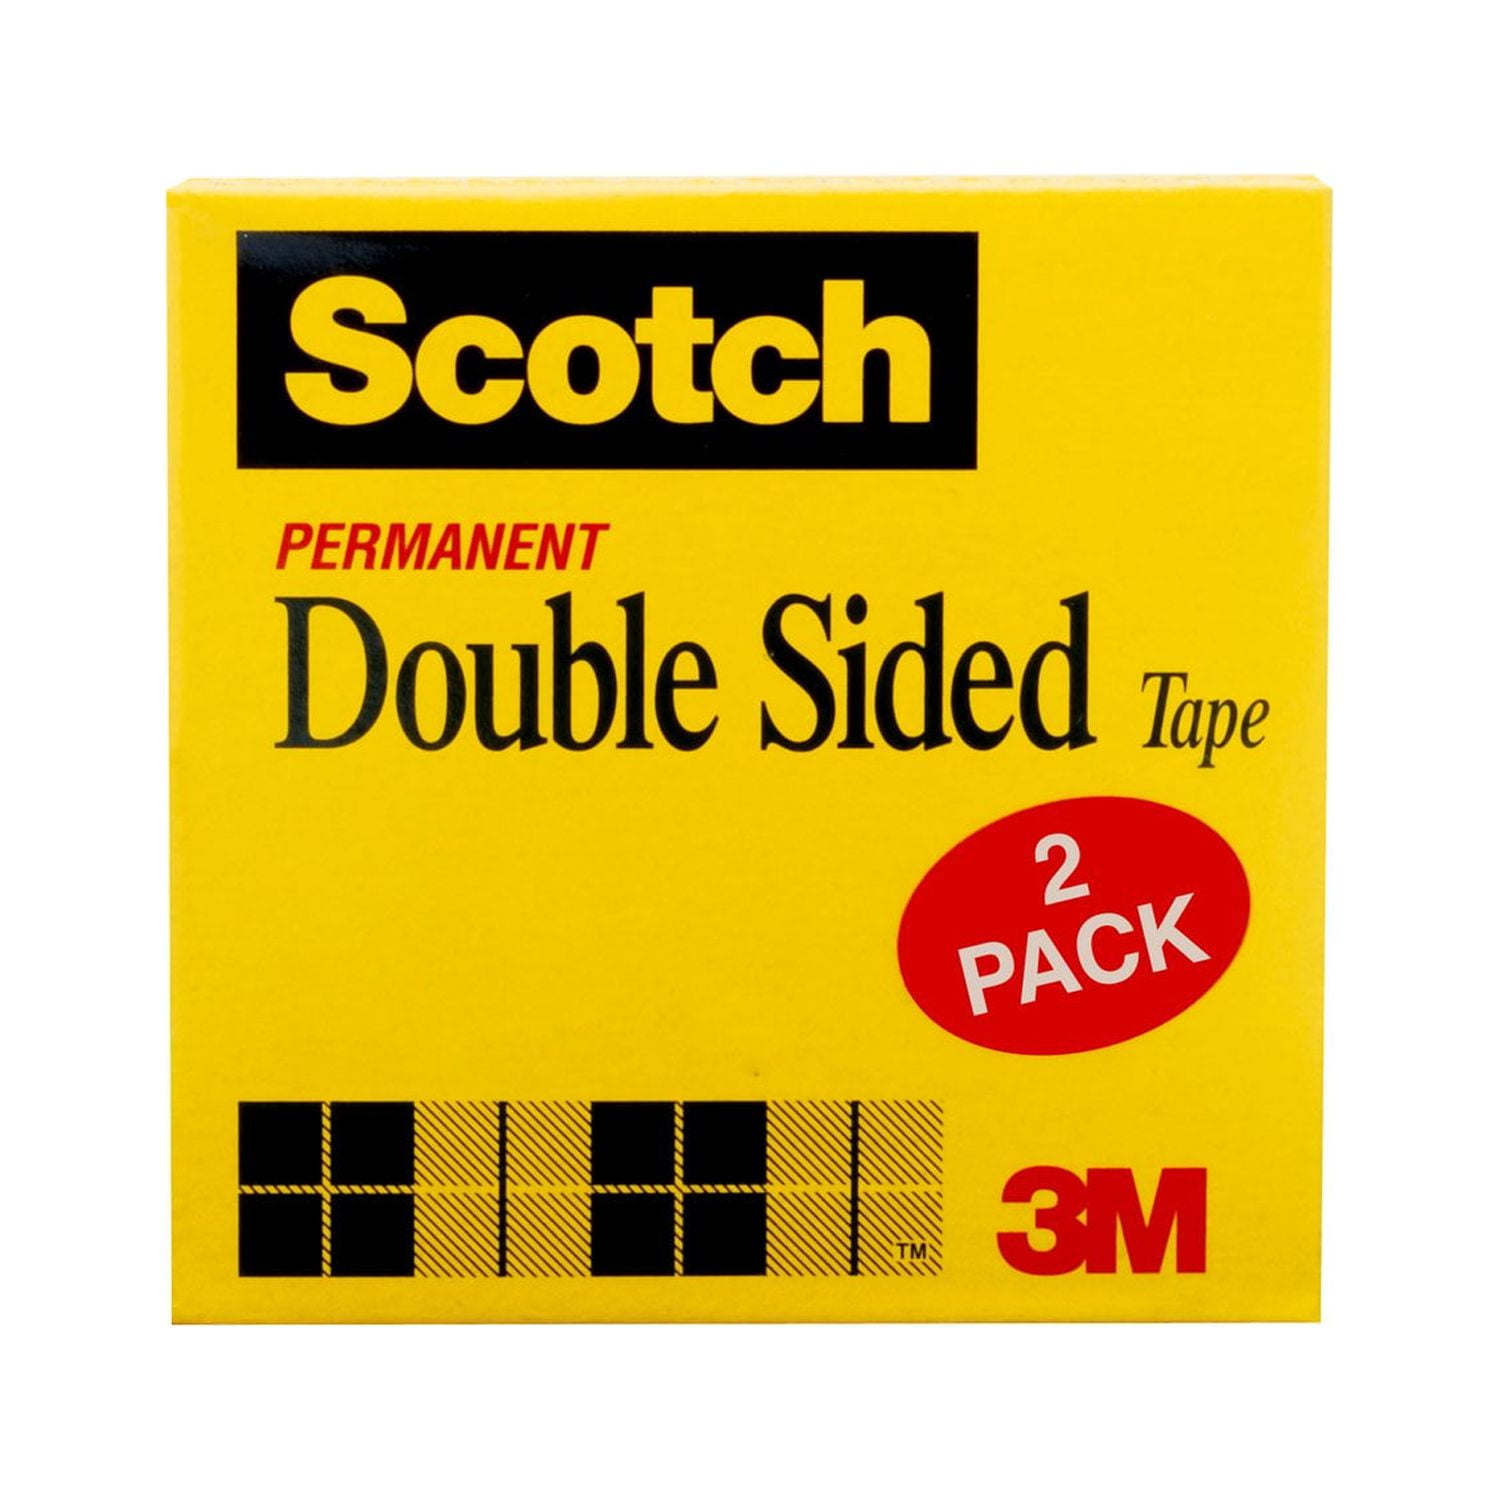 FindTape MGMP Matched Pole Magnetic Tape